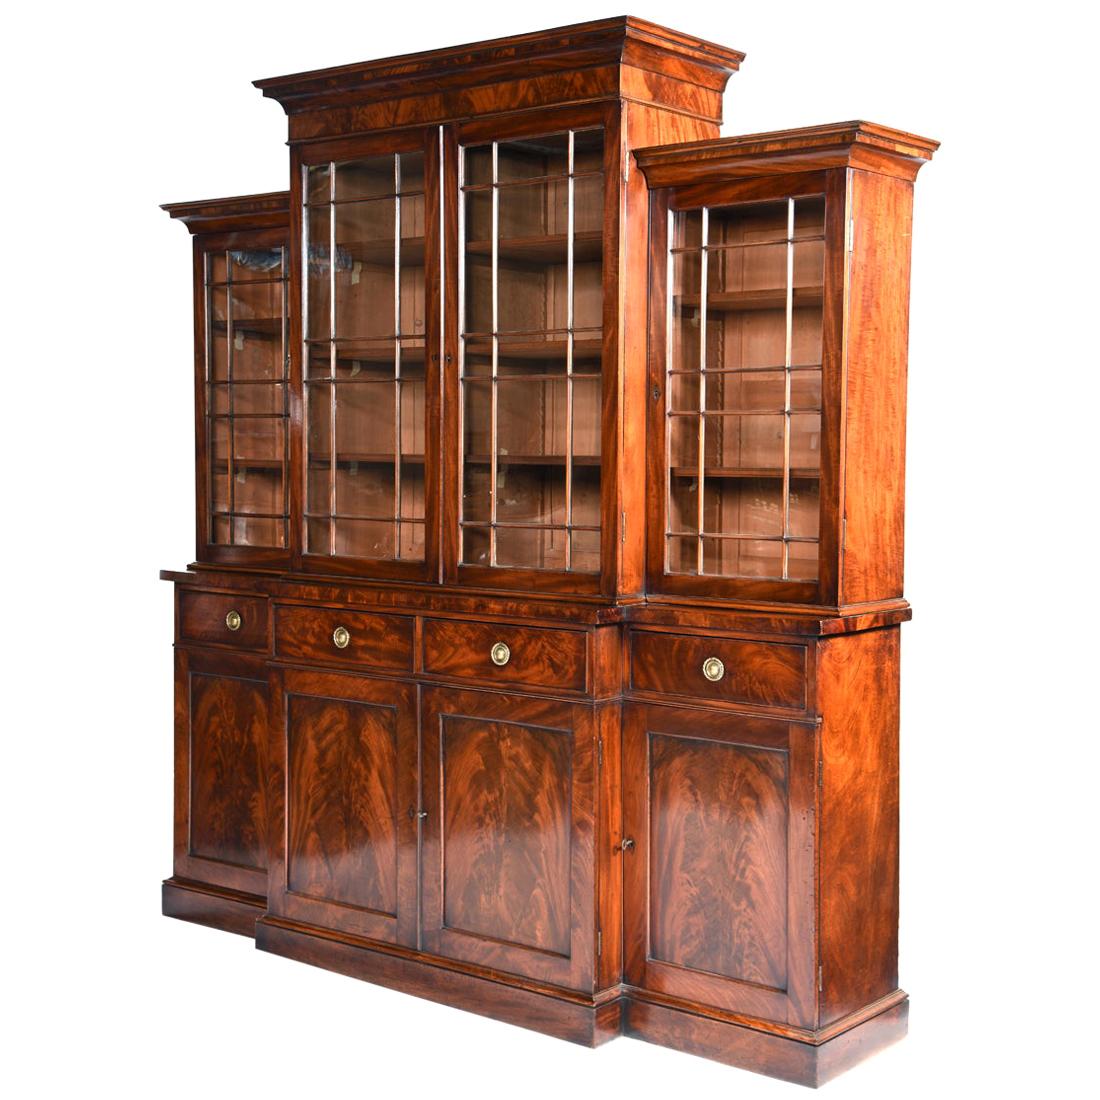 English Regency Period Mahogany Breakfront Bookcase of Smaller Scale, circa 1810 For Sale